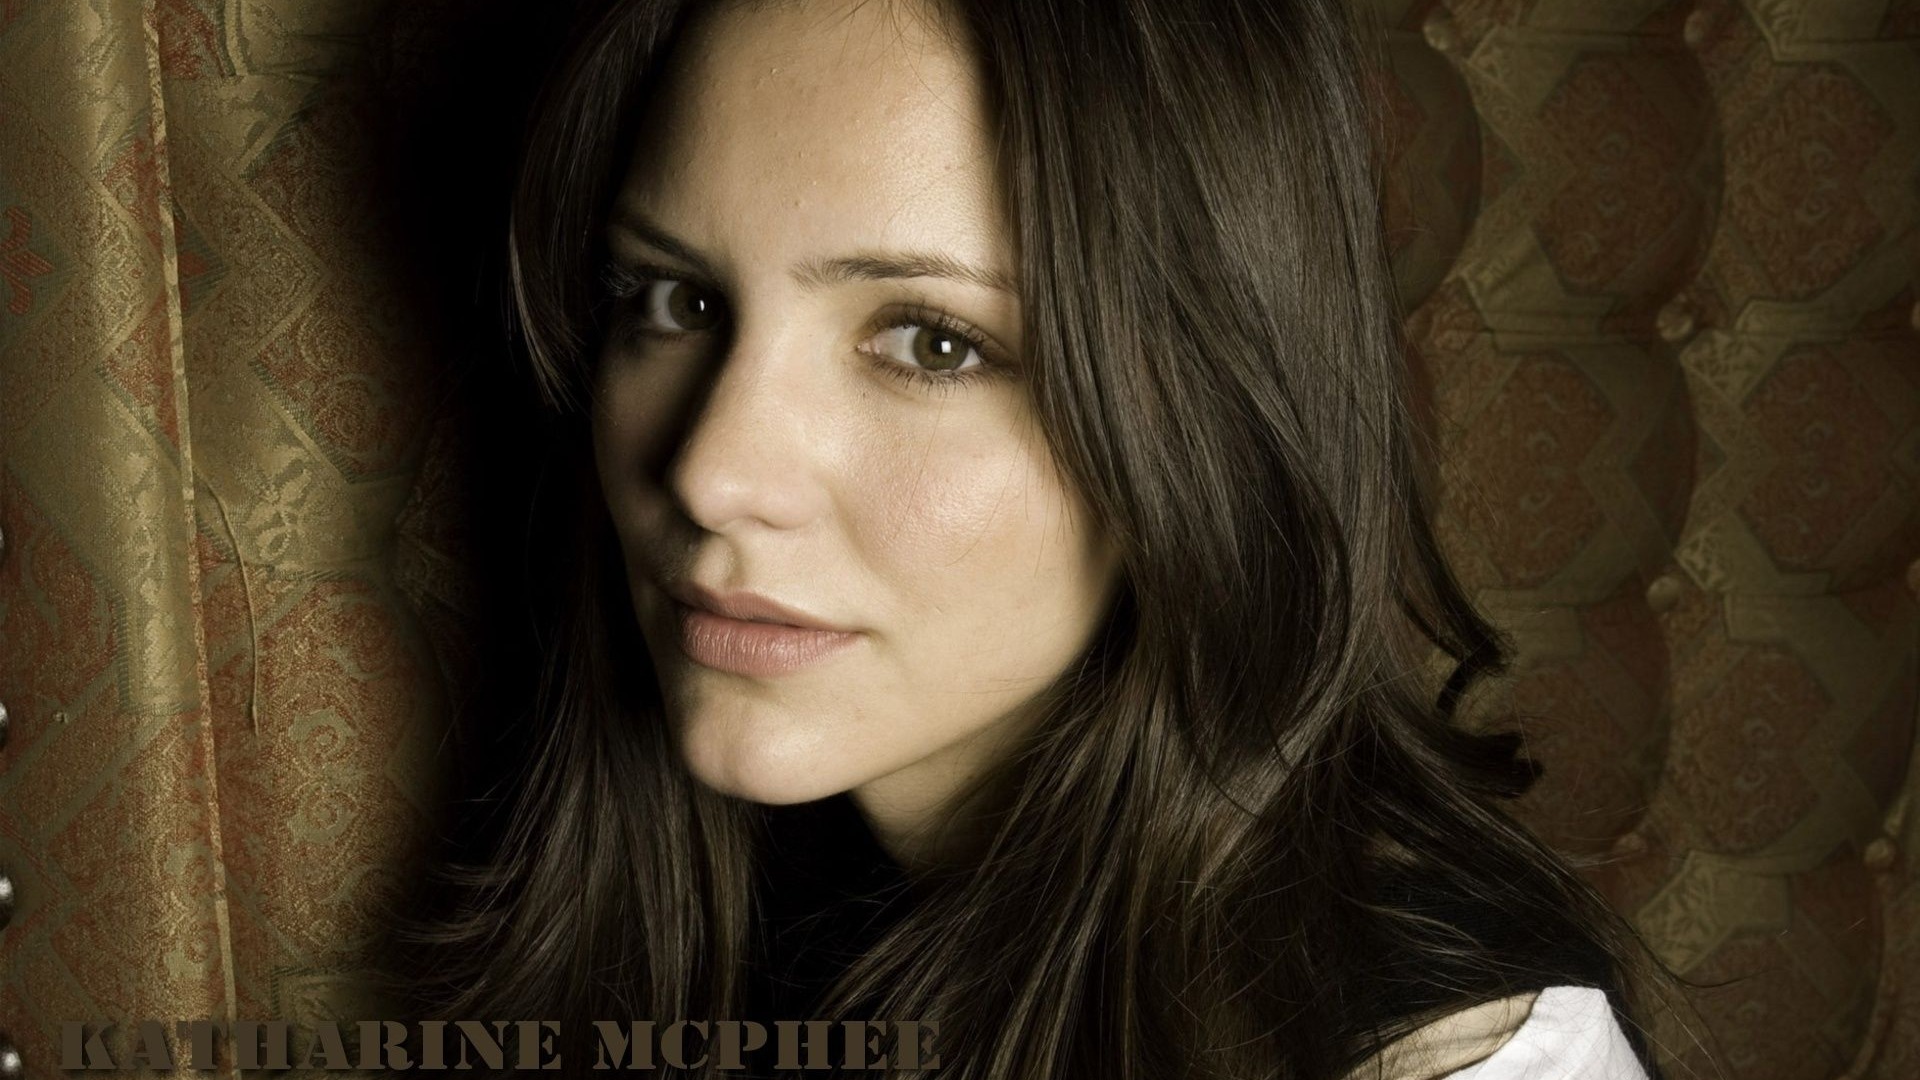 Katharine Mcphee #008 - 1920x1080 Wallpapers Pictures Photos Images